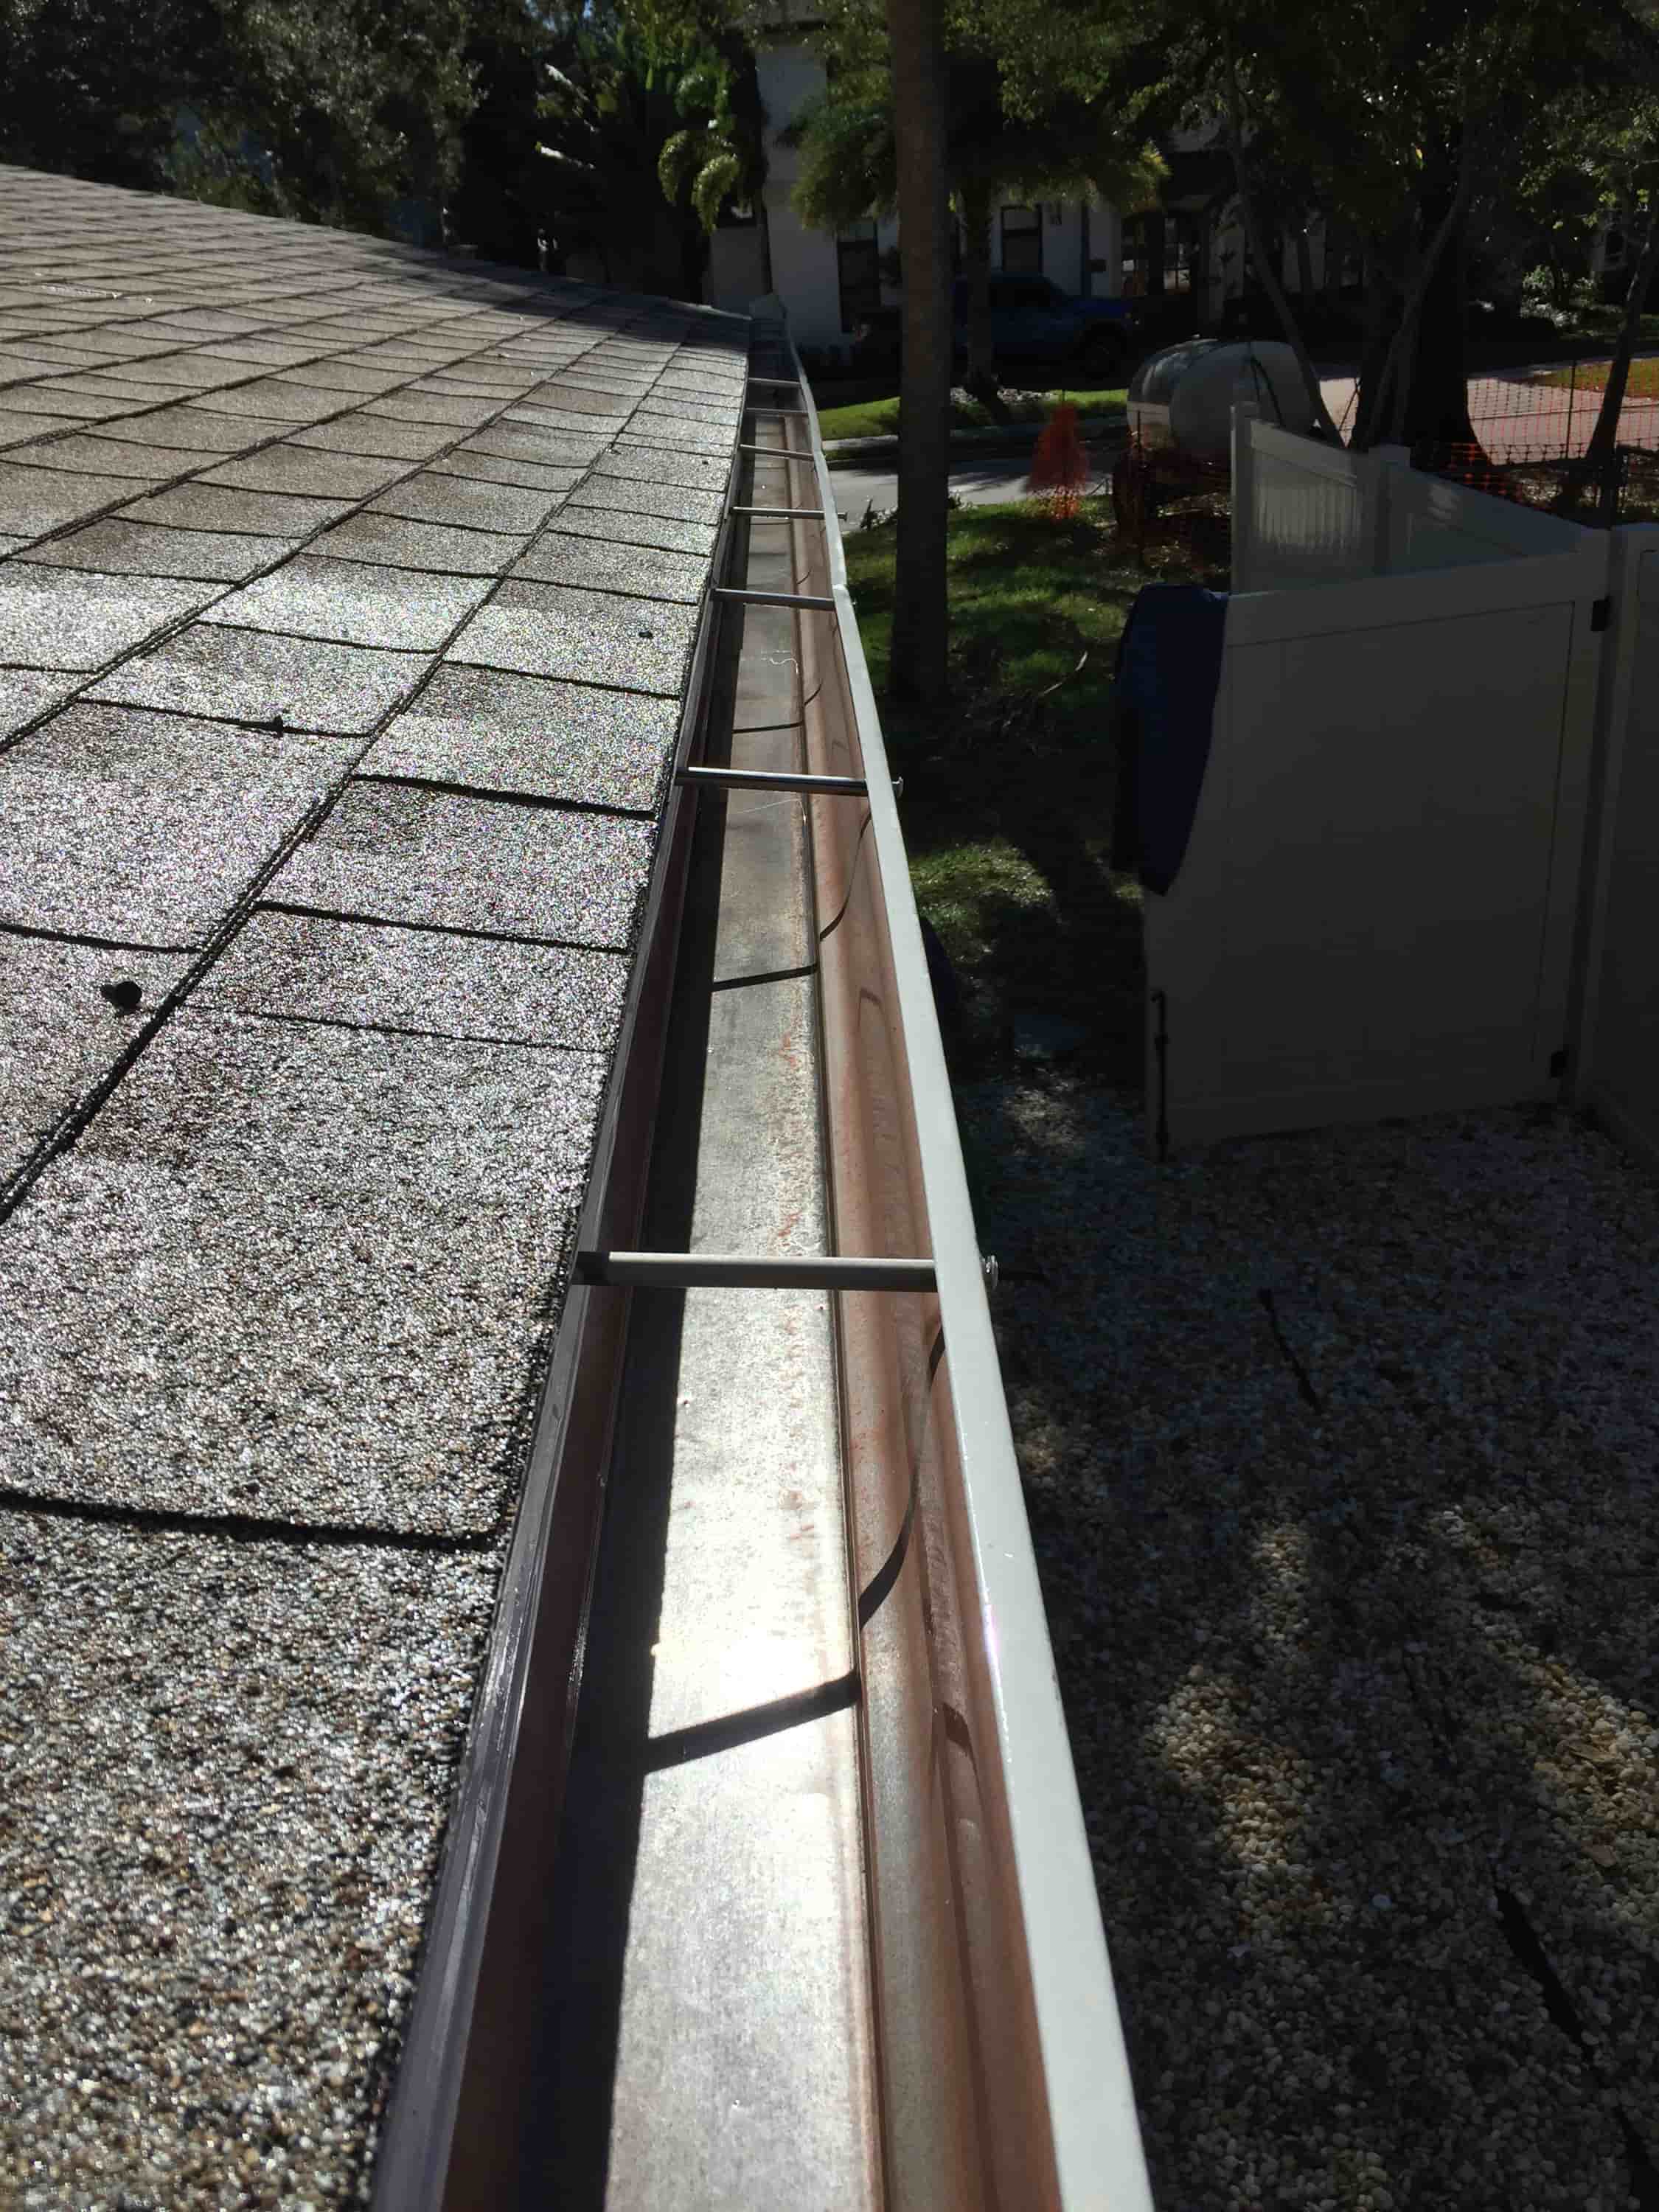 gutter and window cleaning